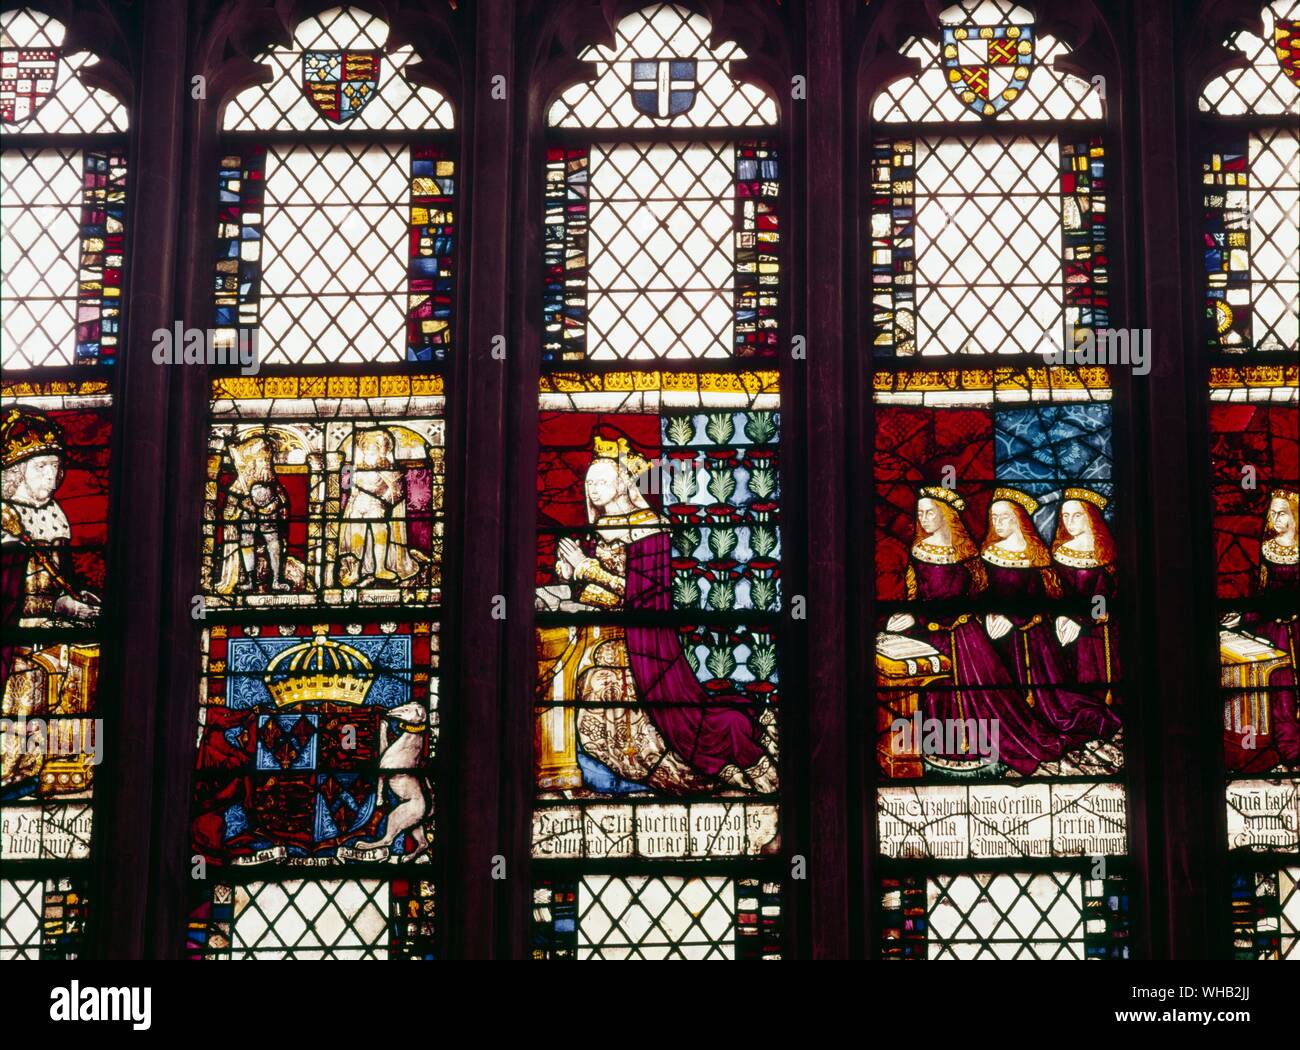 Elizabeth Woodville window Canterbury Cathedral 1482 - Elizabeth Woodville or Wydville (c. 1437 - 7/8 June 1492) was the Queen consort of King Edward IV of England from 1464 until his death in 1483.. Stock Photo